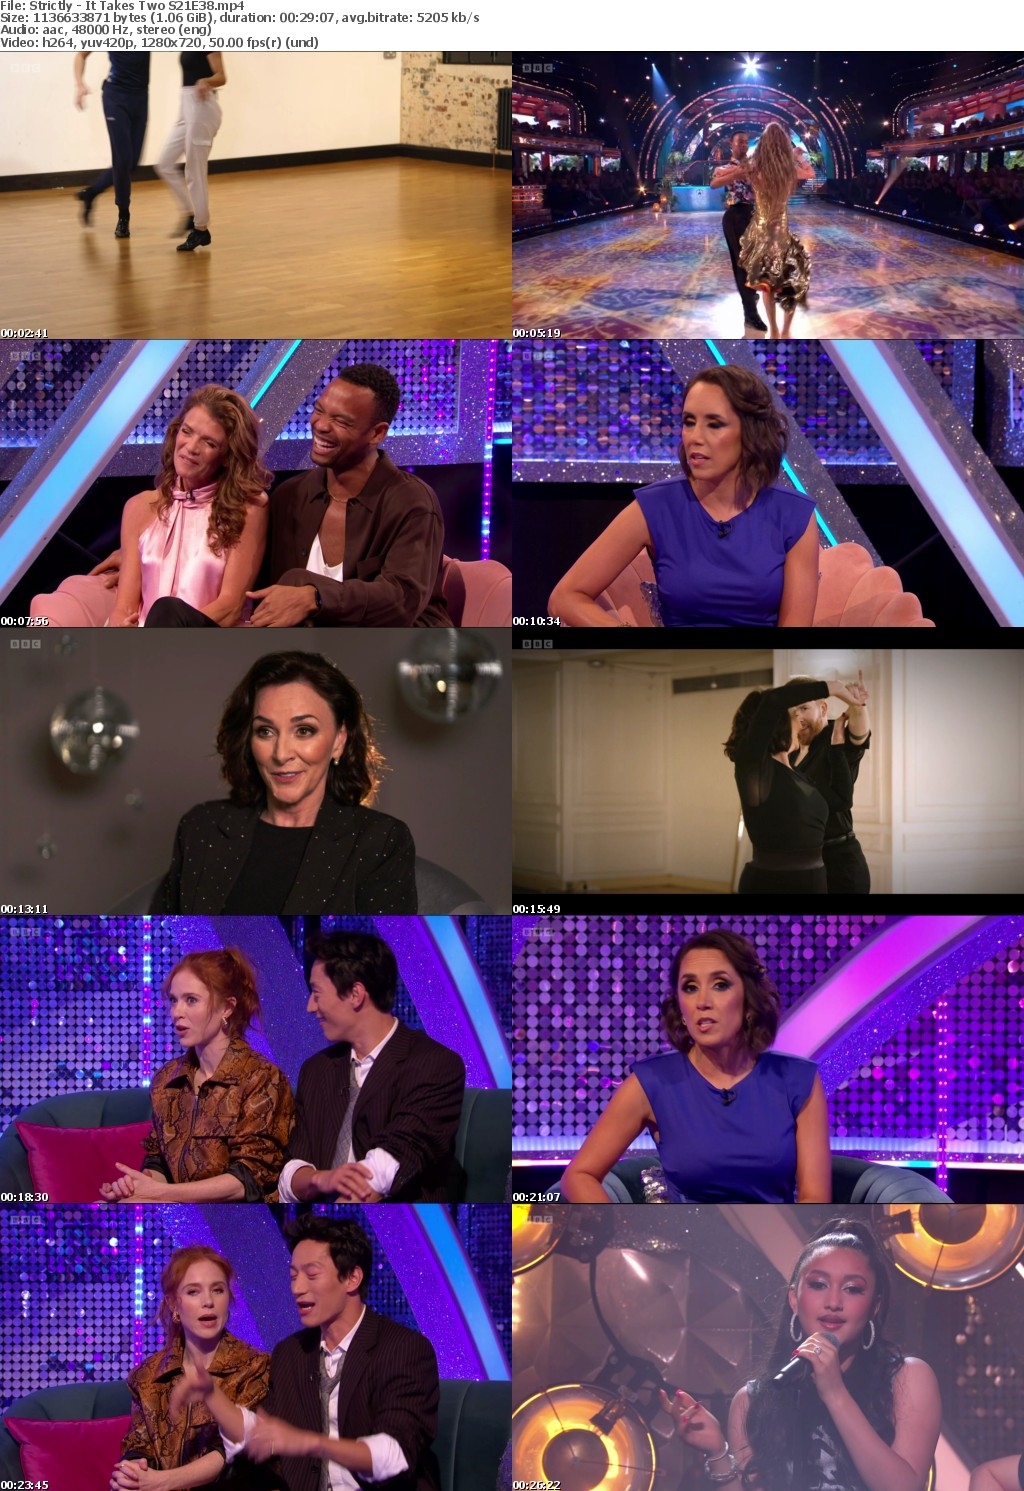 Strictly - It Takes Two S21E38 (1280x720p HD, 50fps, soft Eng subs)